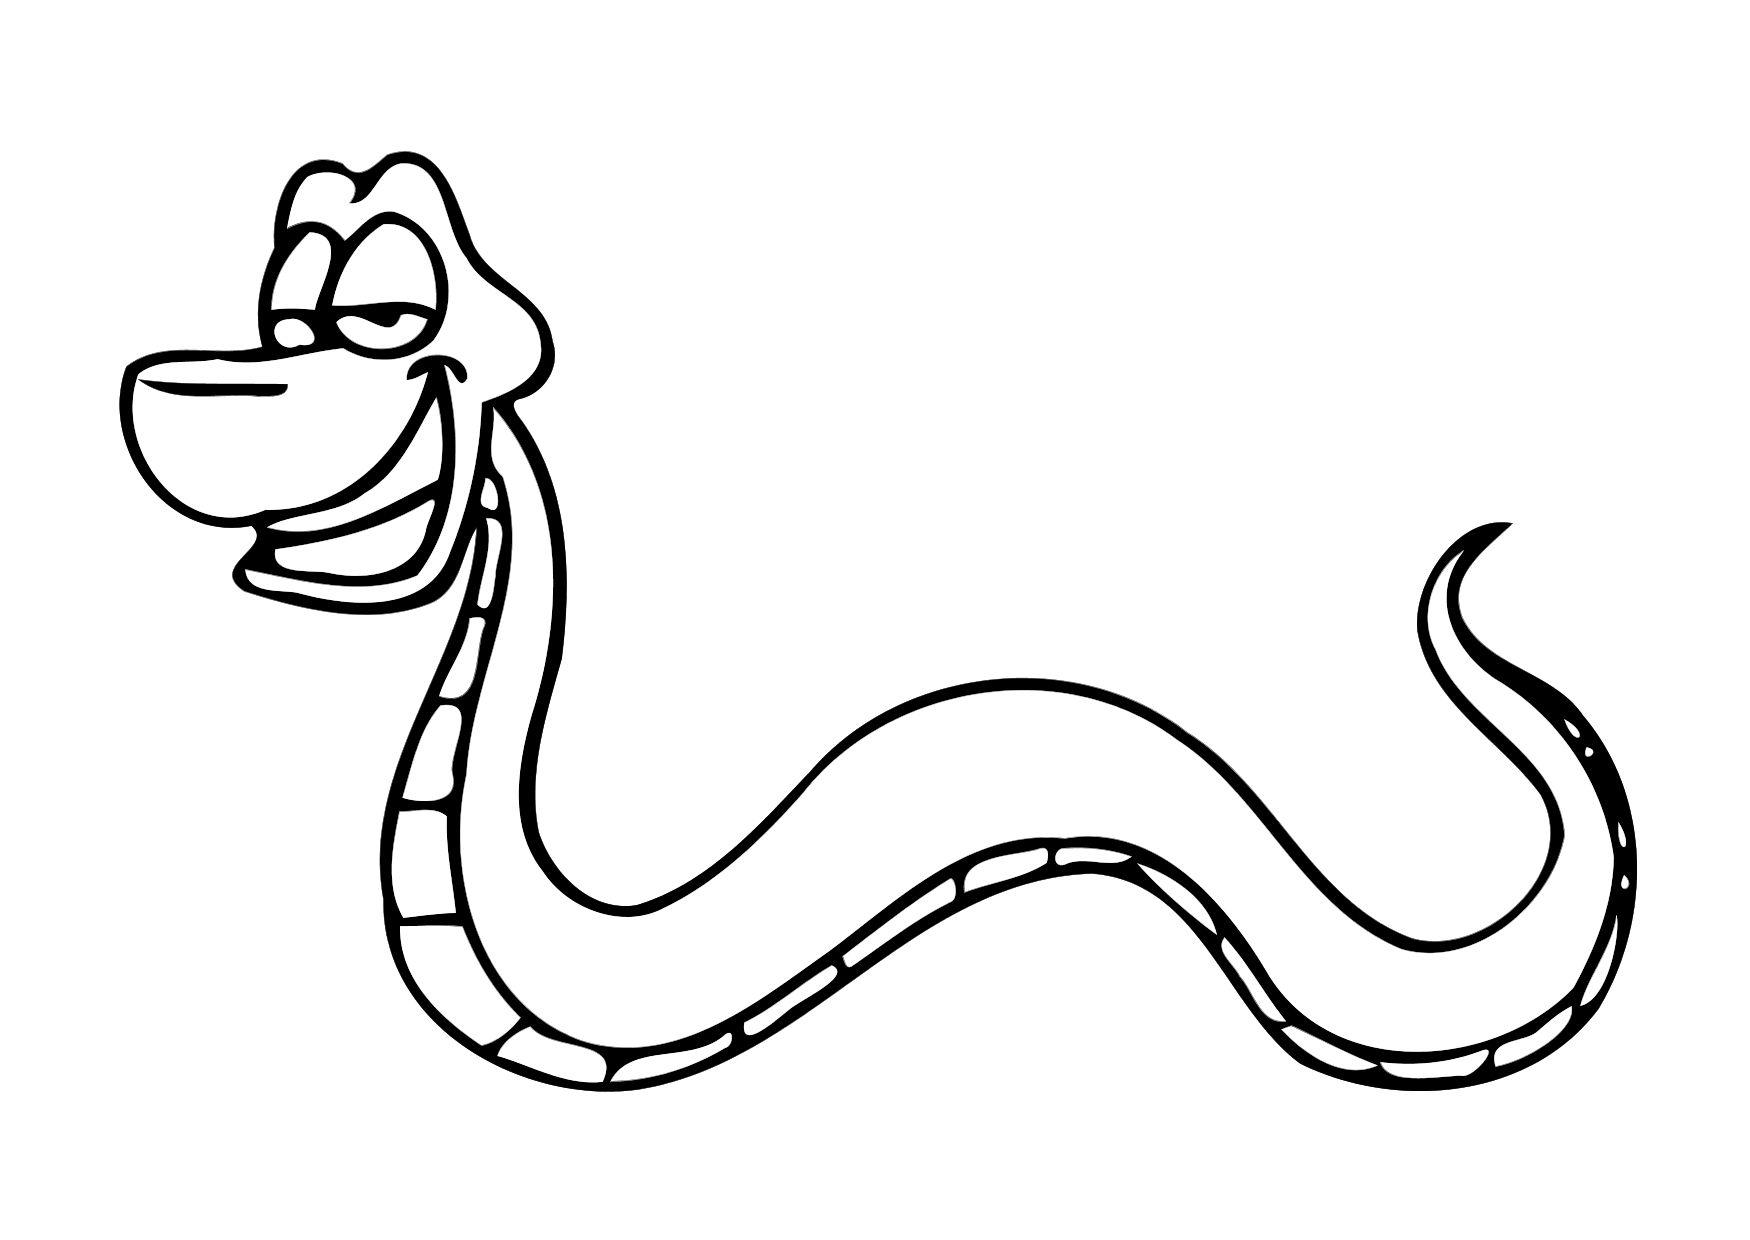 COLORING PICTURES OF SNAKES Â« ONLINE COLORING